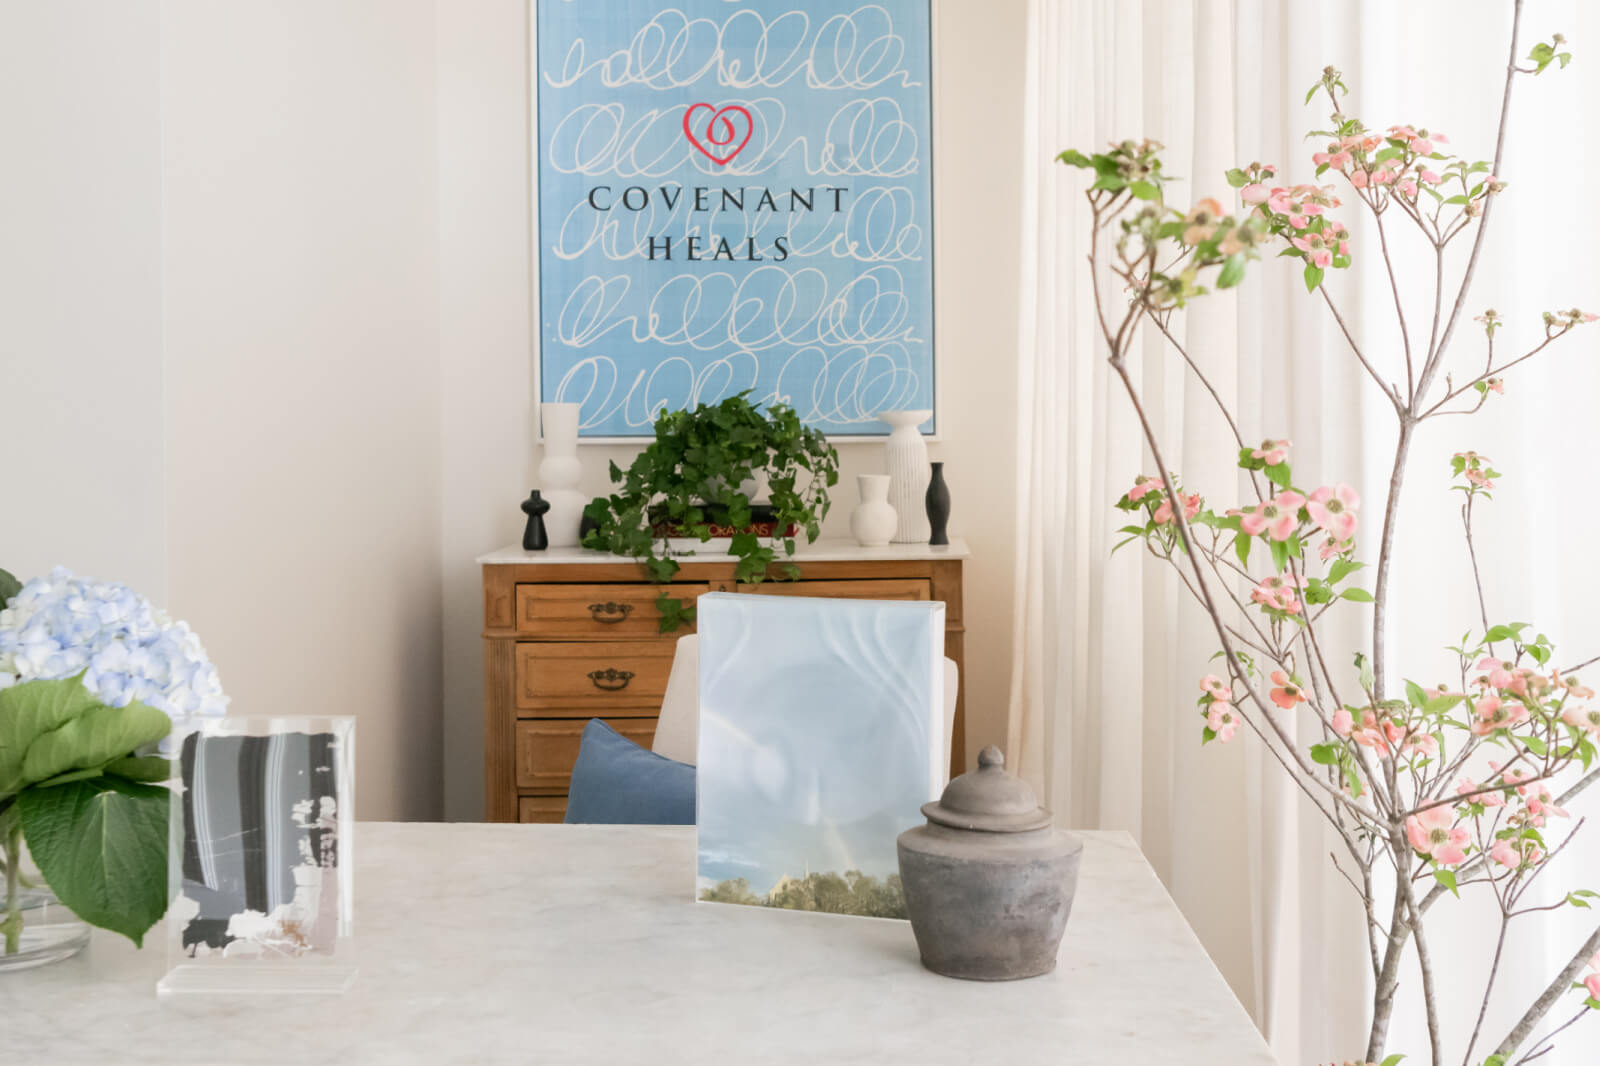 Covenant Heals: The Most Heartfelt Interior Design Project You’ll See This Year